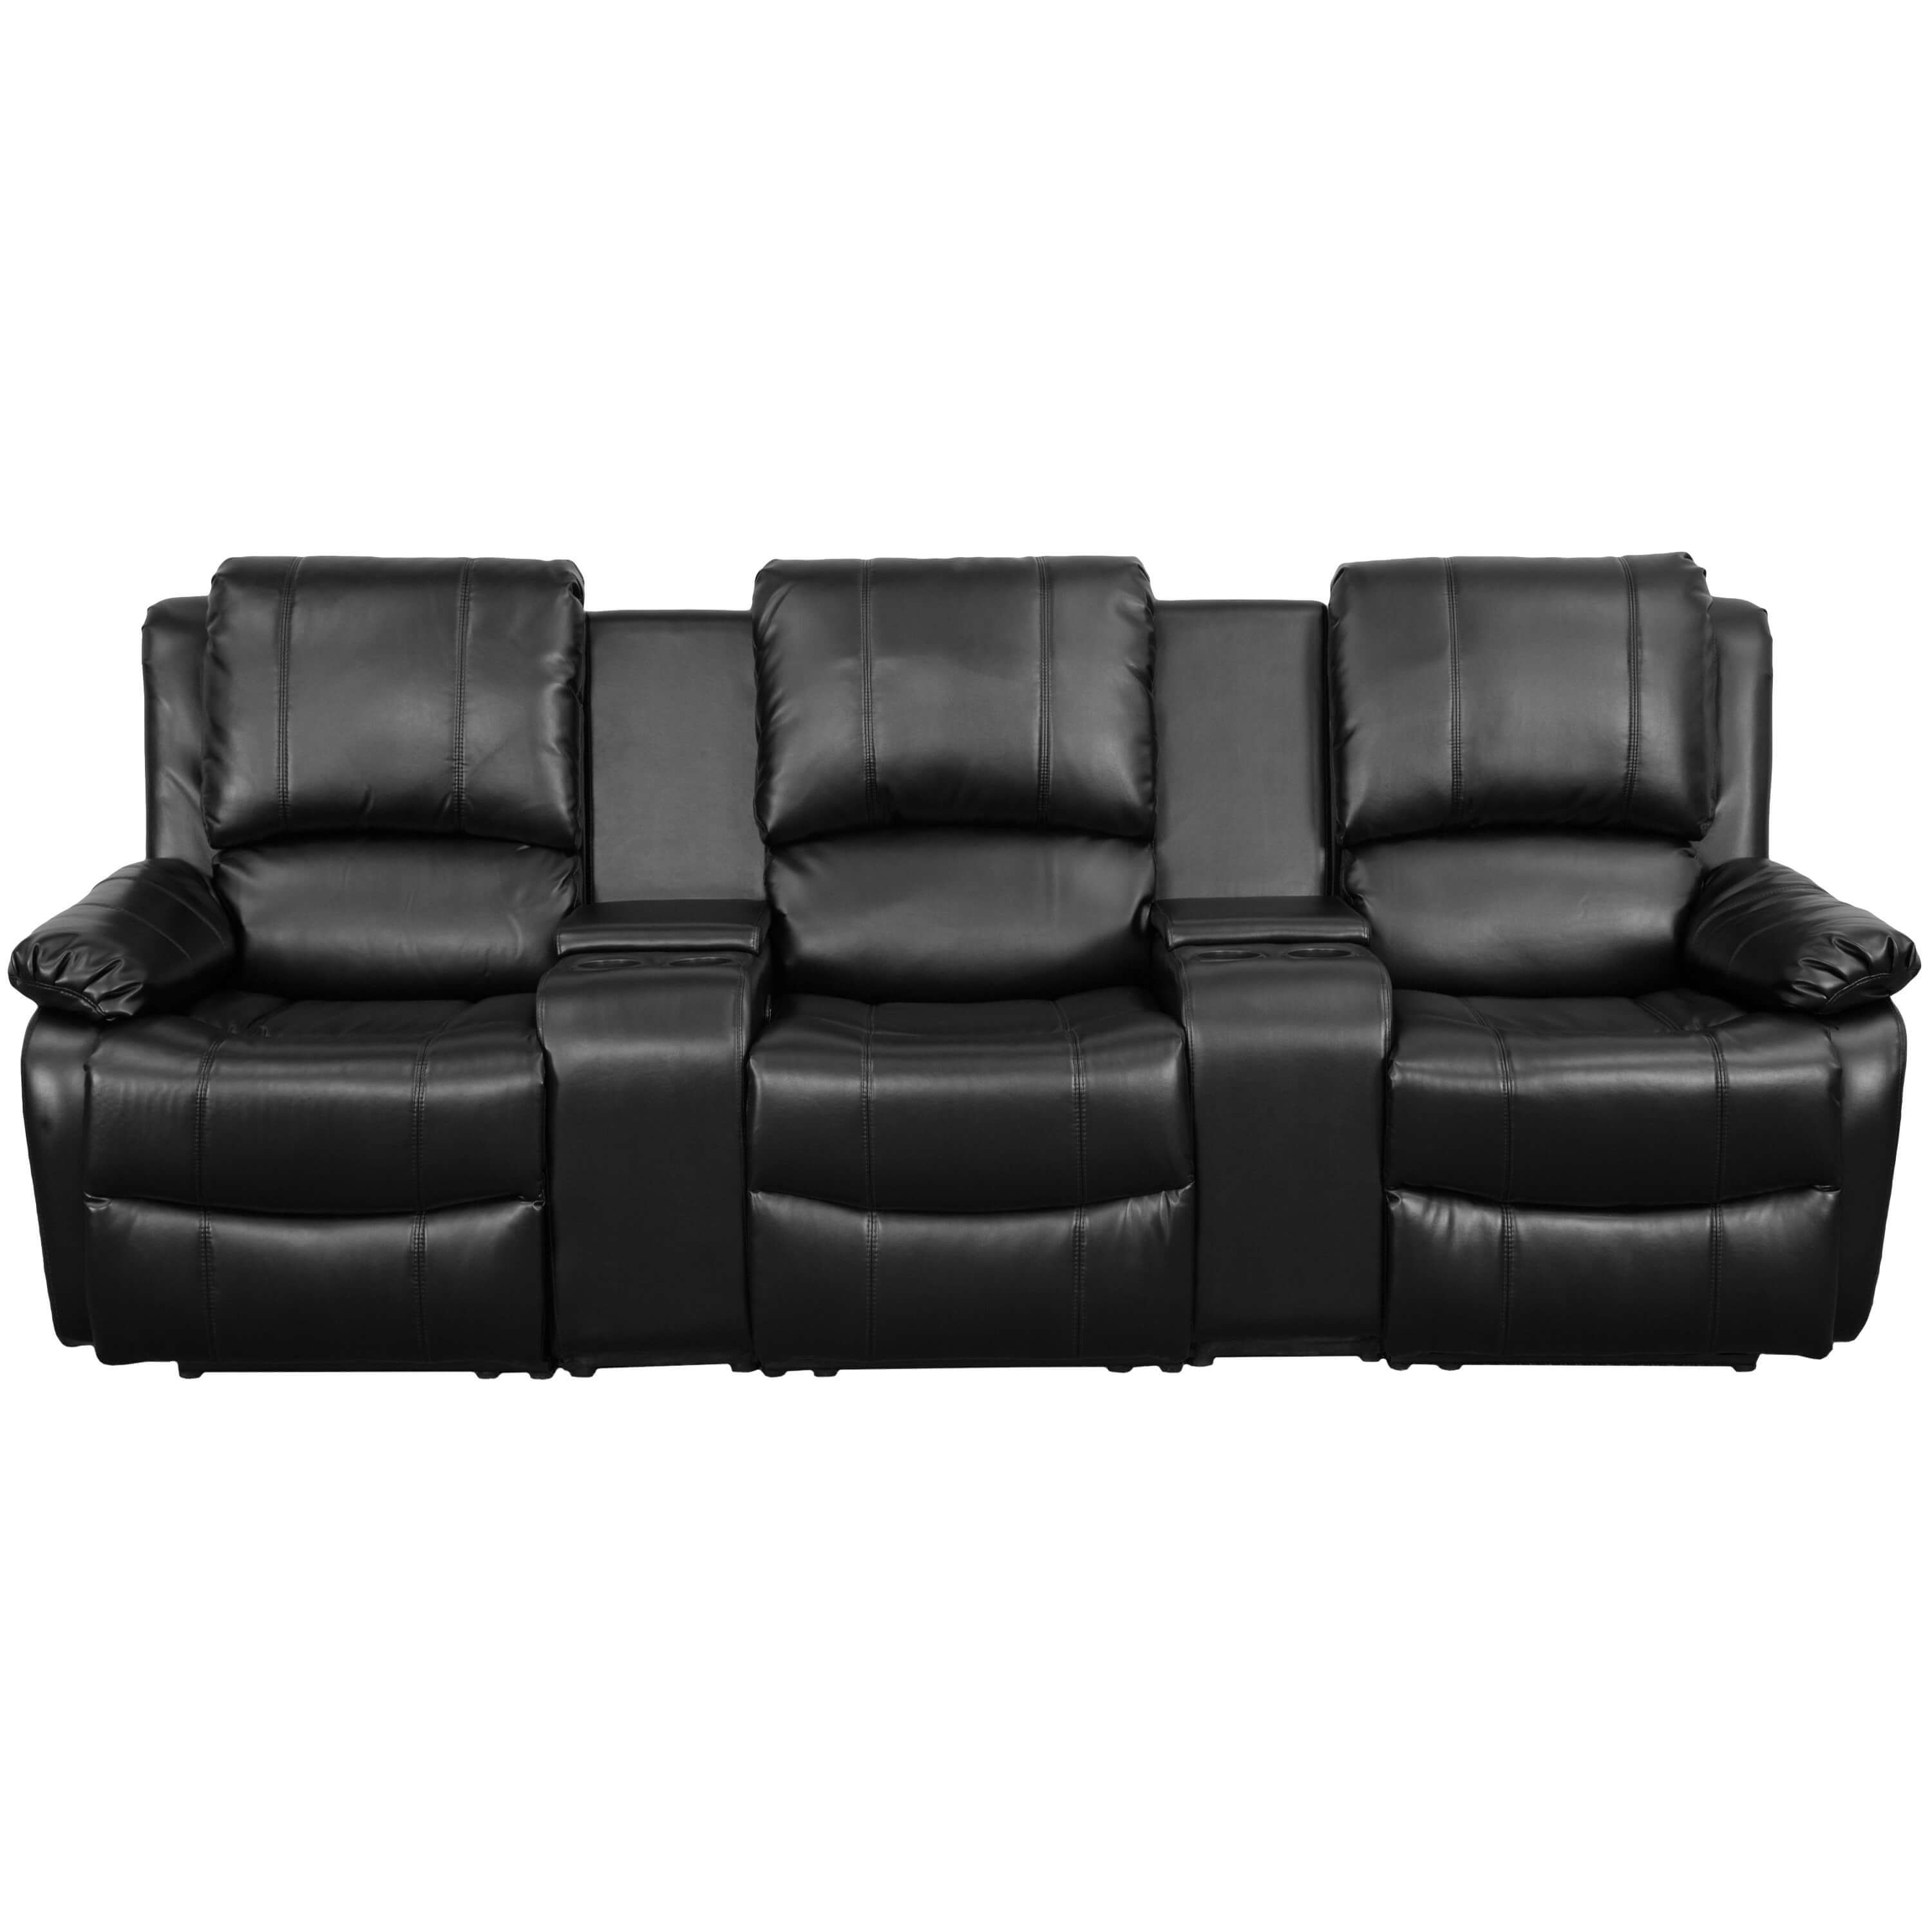 Home theatre seating leather theater chairs